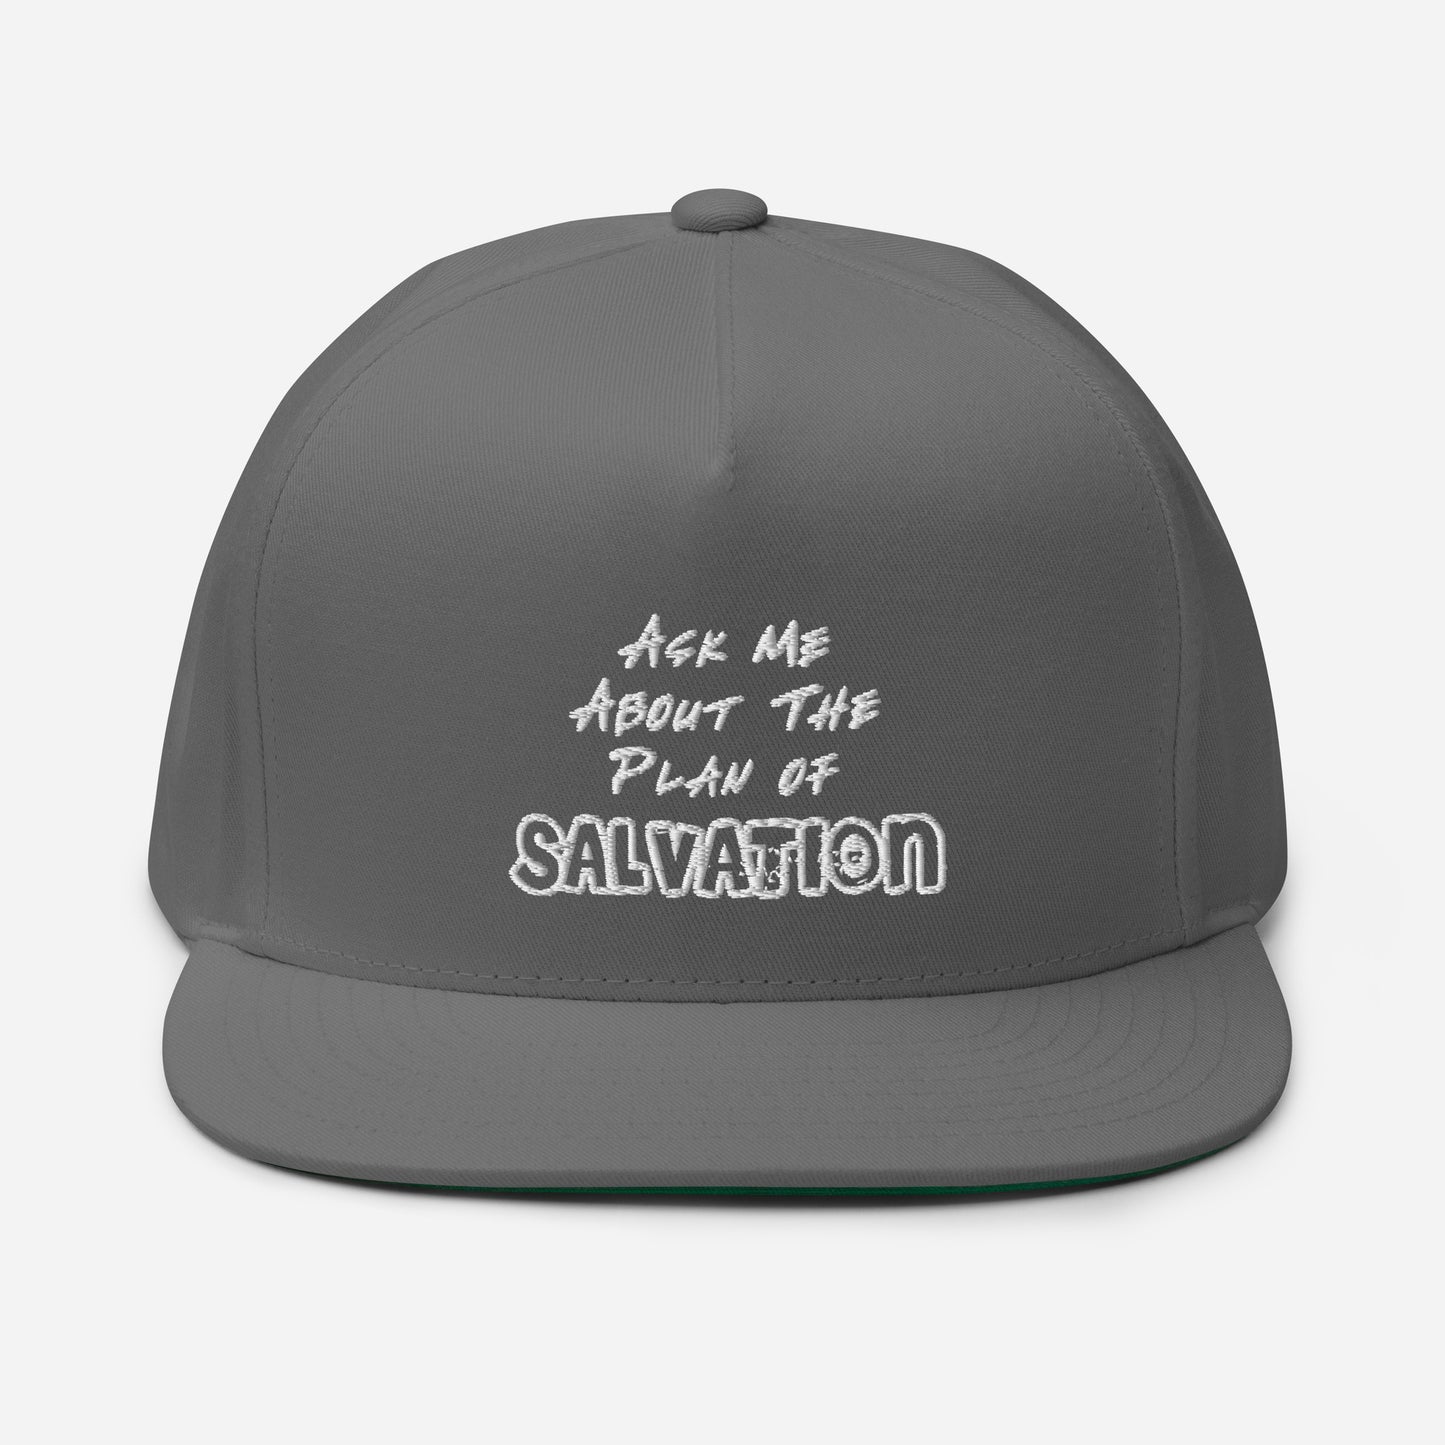 Ask Me About The Plan of Salvation Flat Bill Cap